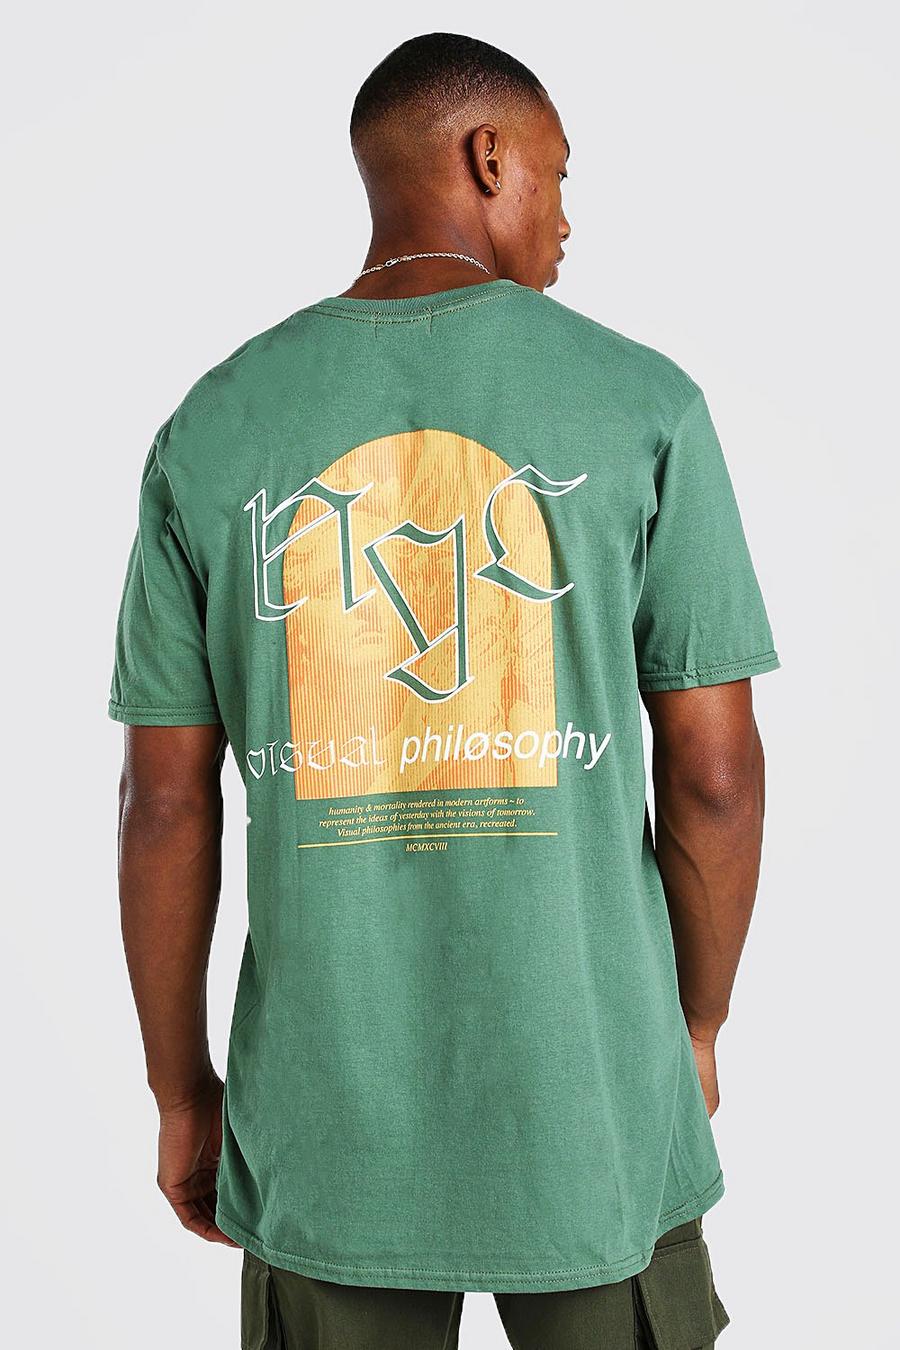 Groen Oversized NYC Philosophy T-Shirt image number 1